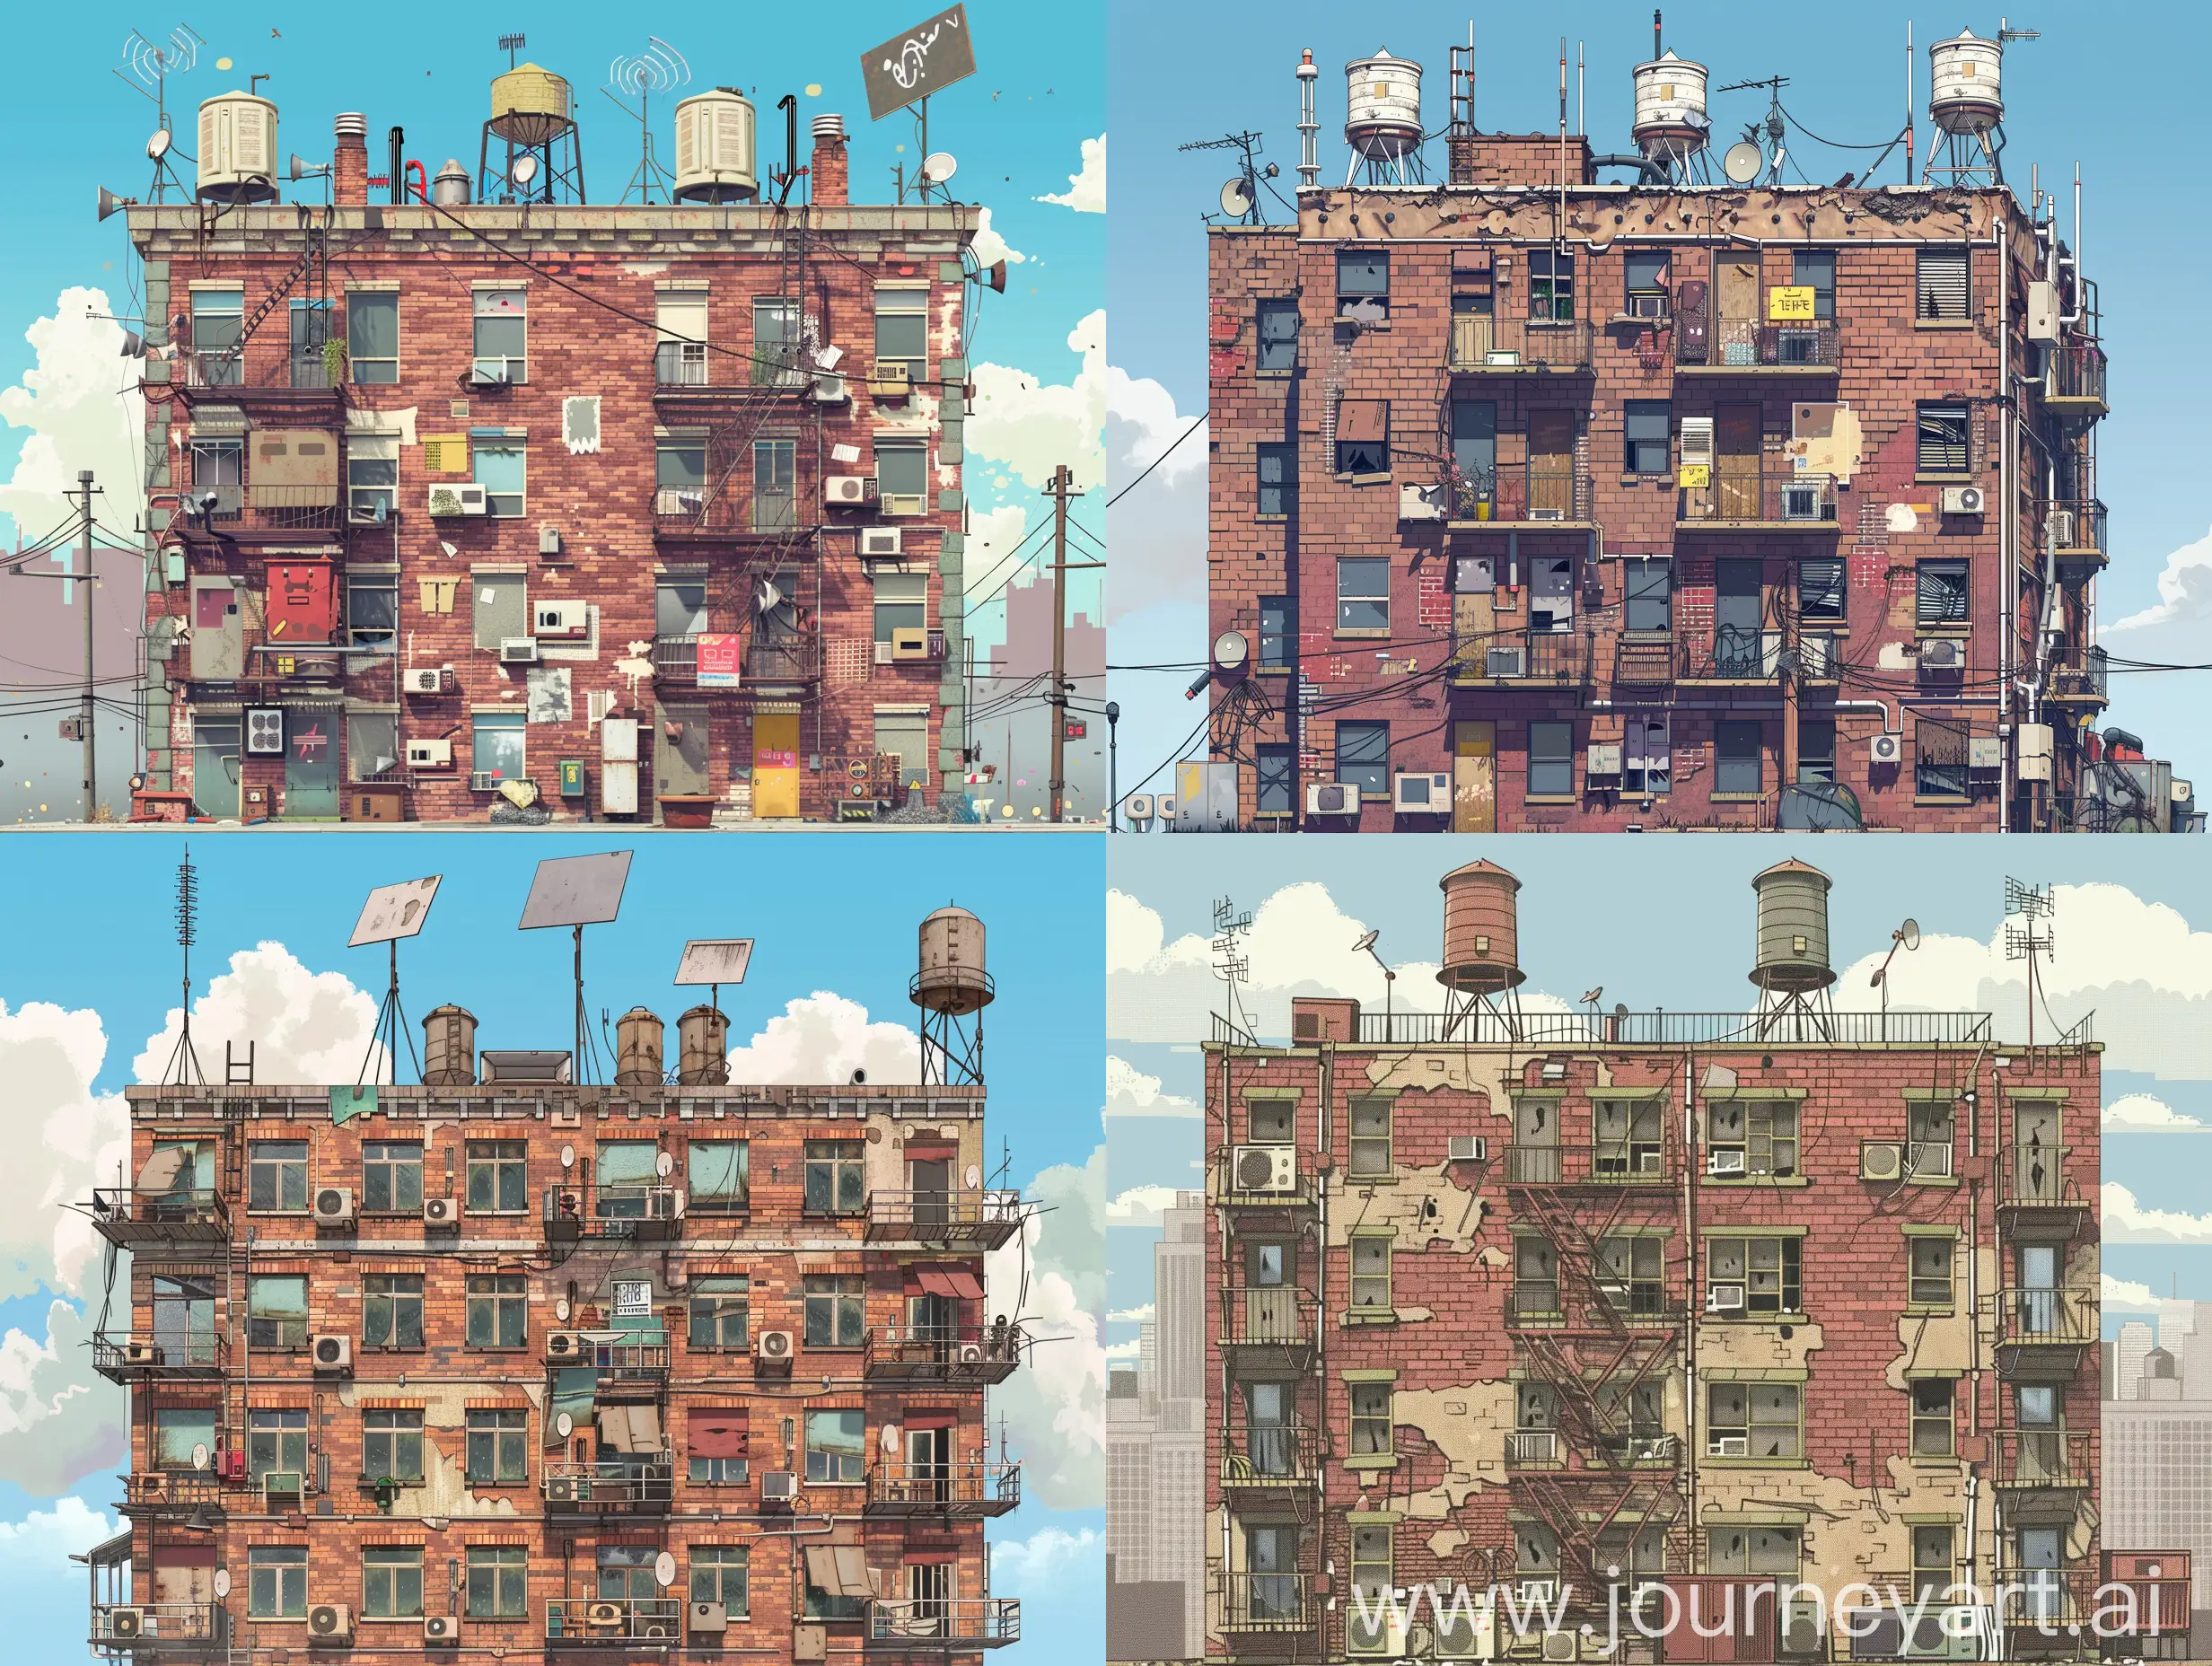 Urban-Decay-Dilapidated-Brick-Apartment-Building-with-Antennas-and-Water-Towers